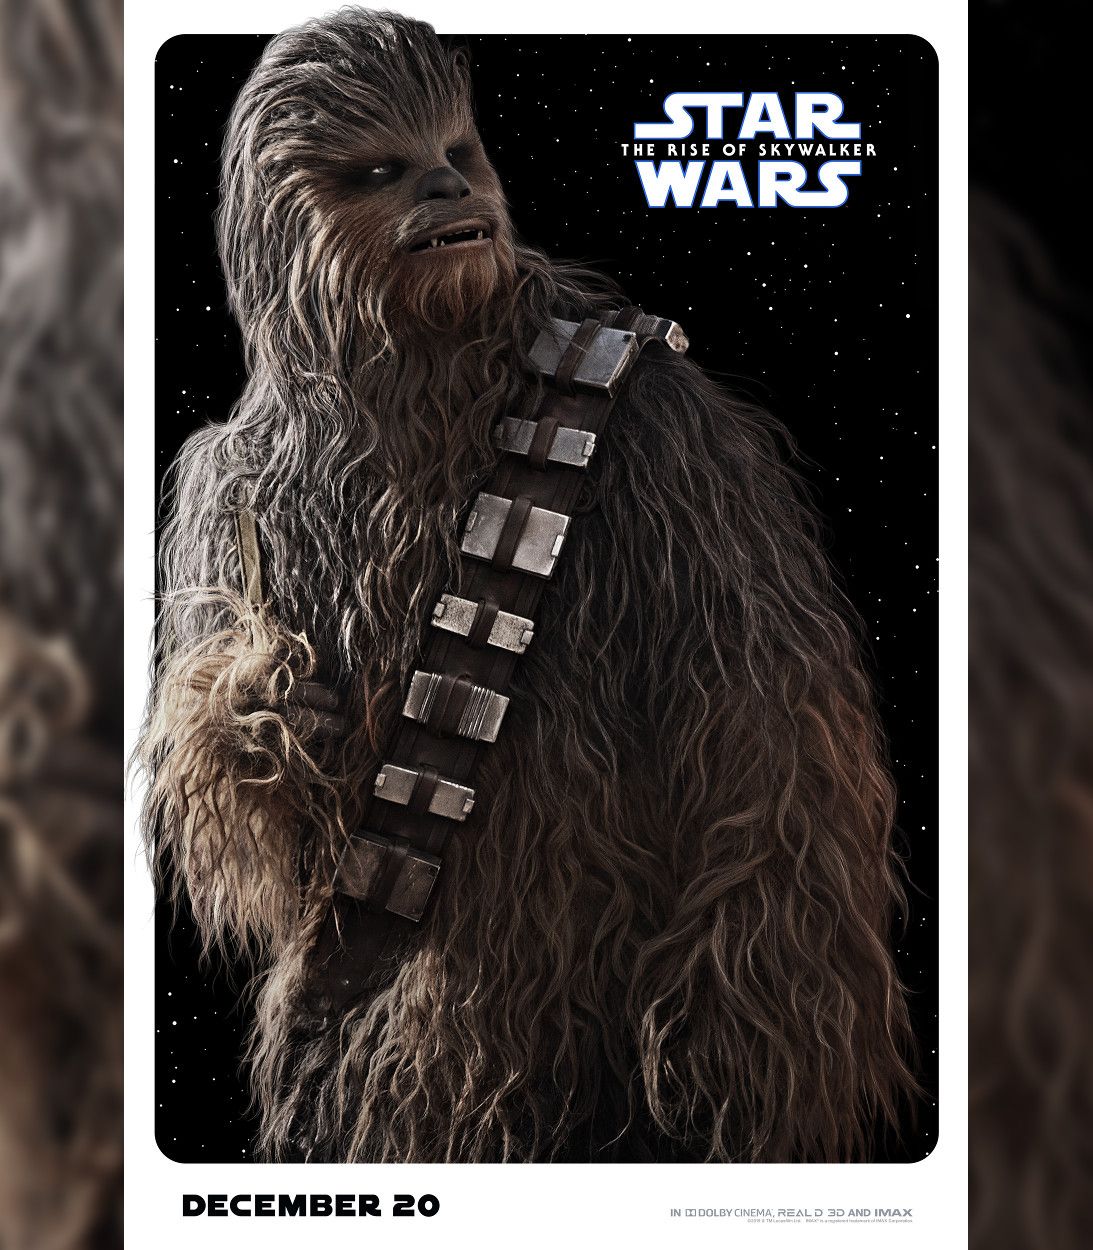 Star Wars The Rise Of Skywalker Character Poster Chewbacca